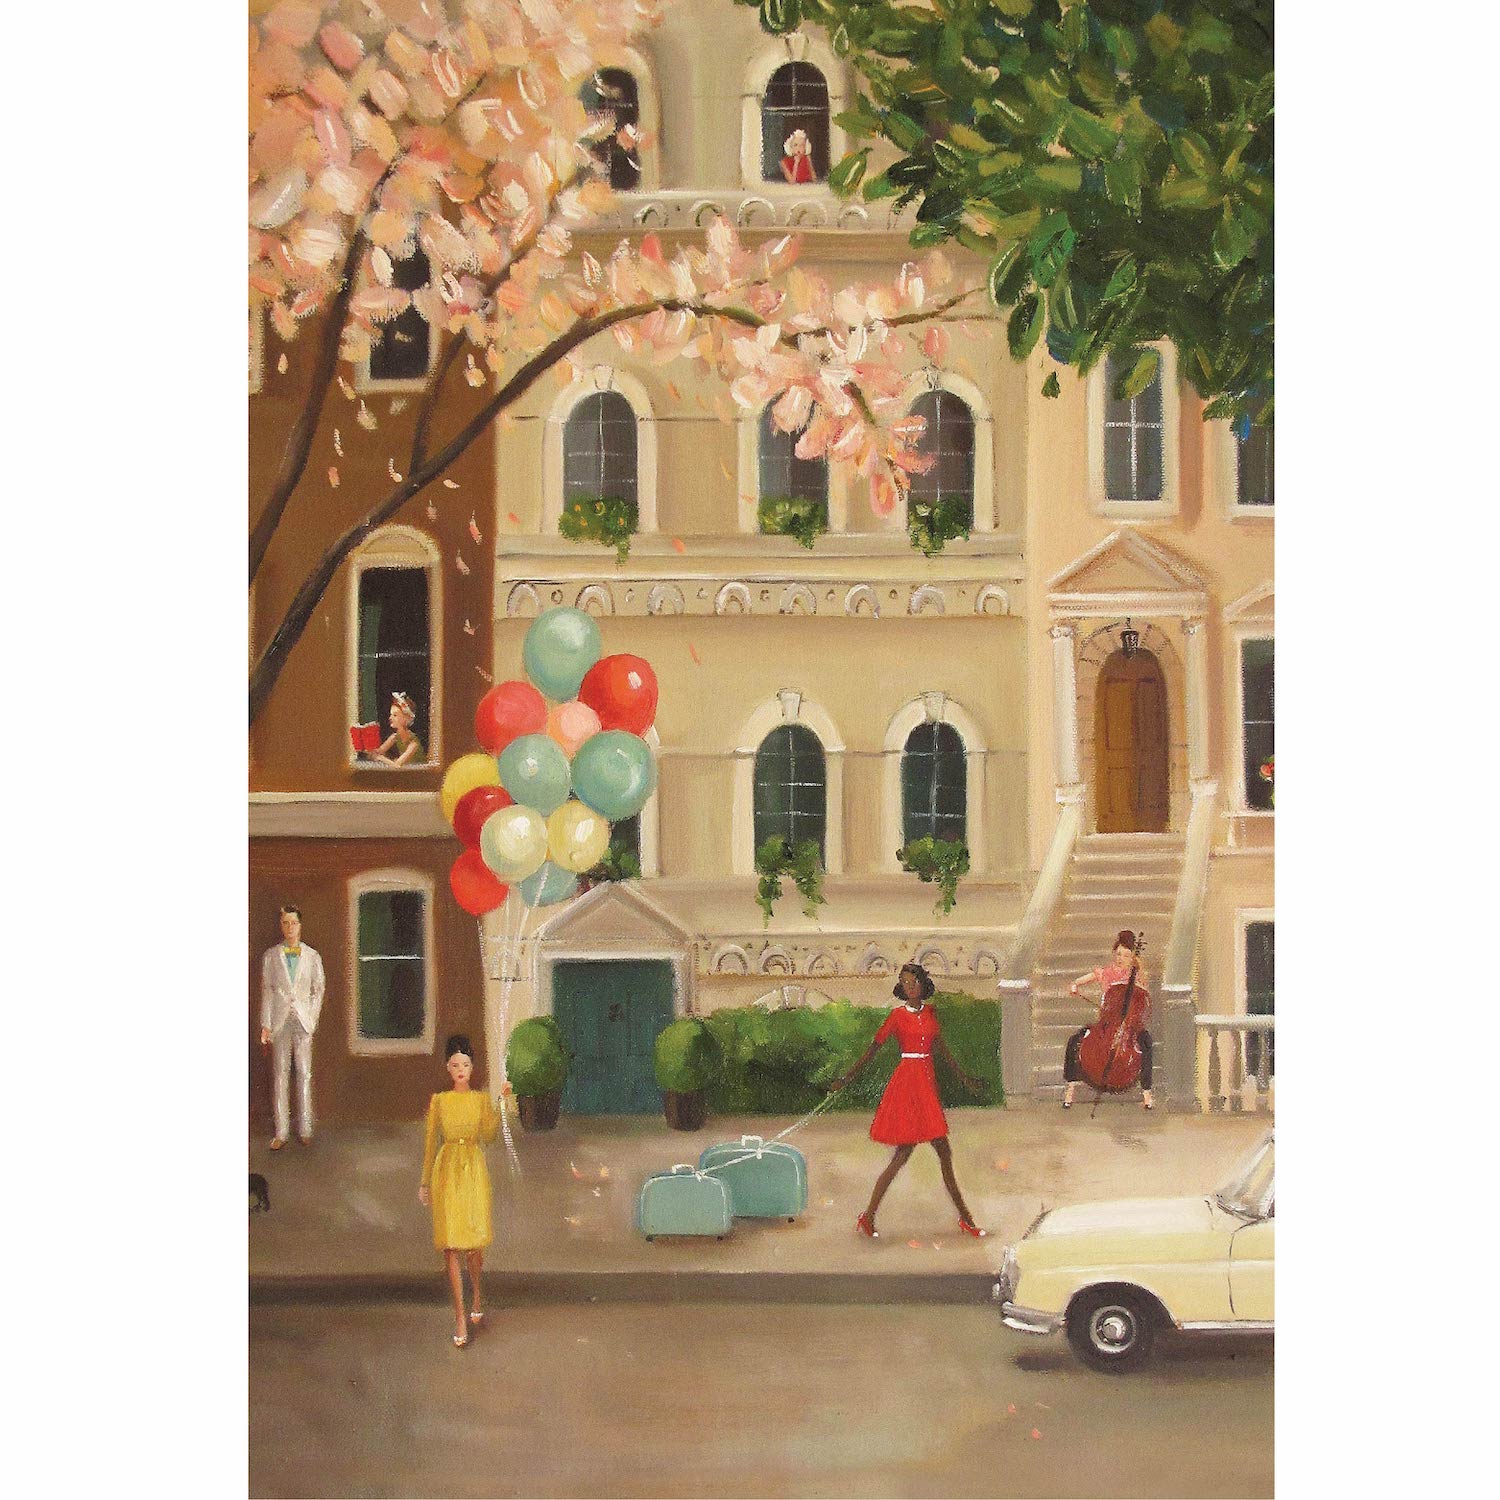 The back side of each sheet in the notepad: a painterly illustration of a townhome exterior, with various vintage-dressed people on the sidewalk: a woman in a yellow dress holding balloons, a woman in a red dress pulling teal suitcases, a man in a white suit leaning on a the wall, and a lady playing a cello sitting on the stoop.